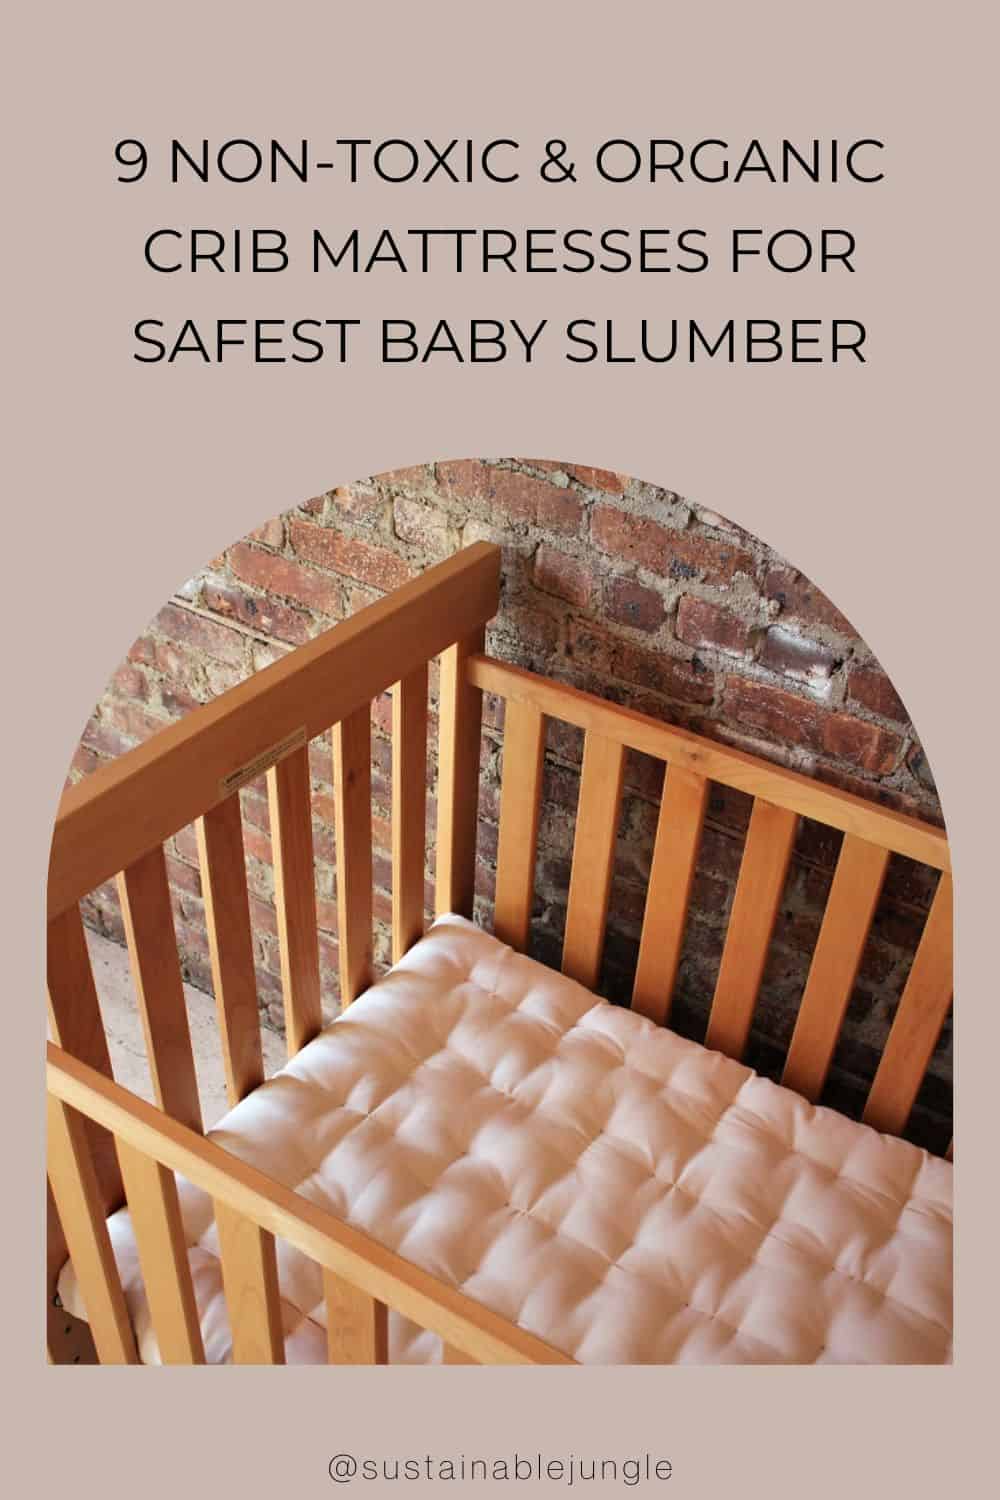 9 Non-Toxic & Organic Crib Mattresses For Safest Baby Slumber Image by White Lotus Home #organiccribmattress #bestorganicmattressforcrib #organicbabymattress #nontoxiccribmattresses #bestorganiccribmattress #sustainablejungle